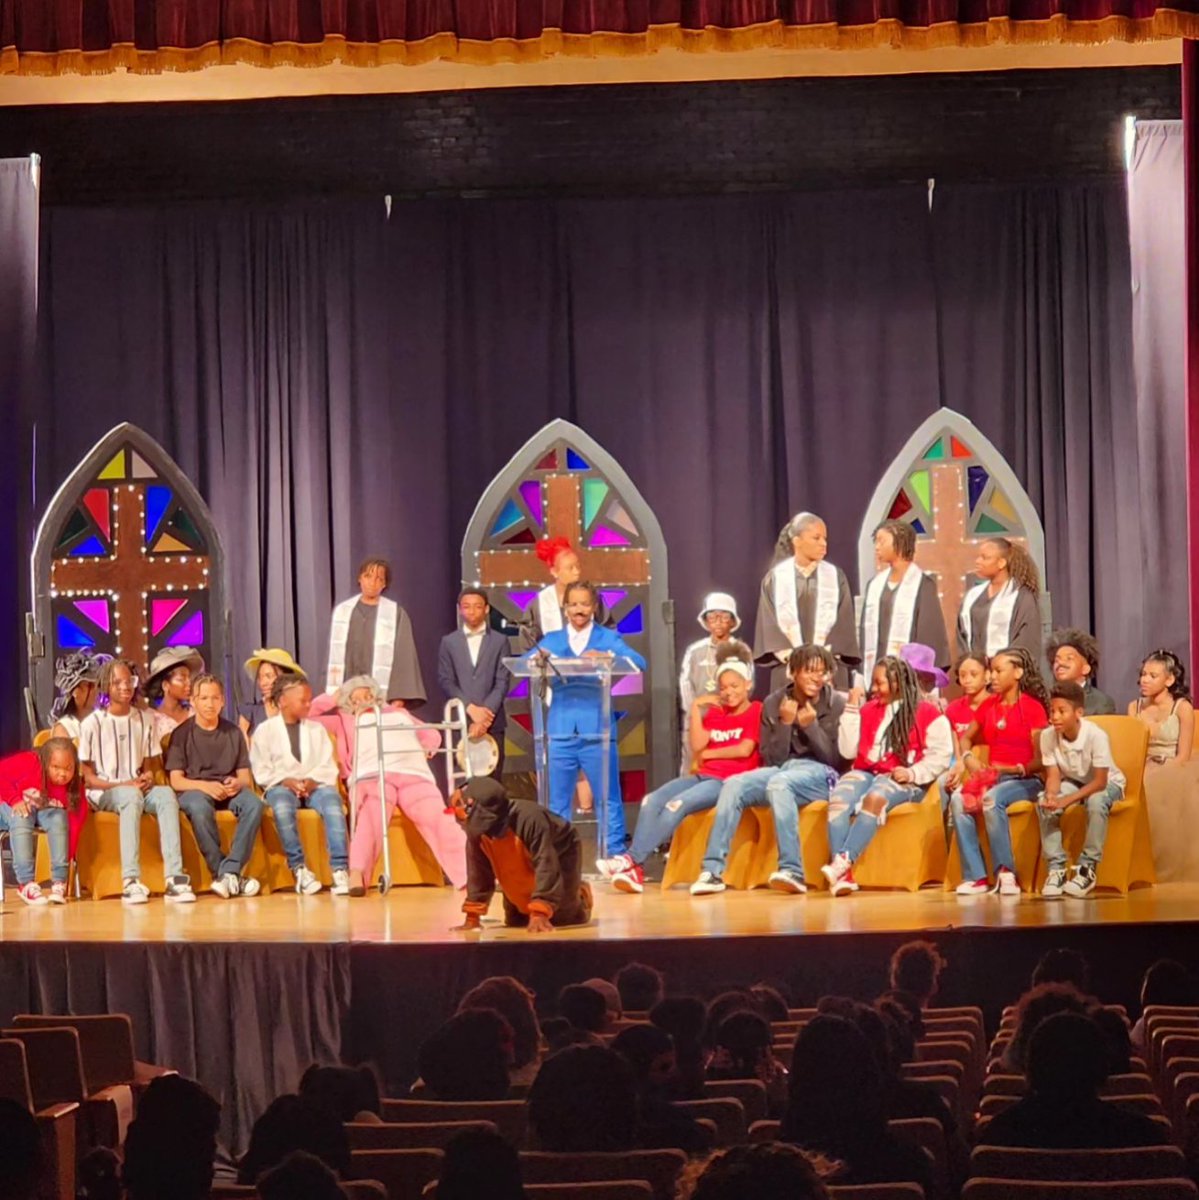 🌟 #AboutLastNight! Our talented Theater Majors wowed the crowd with 'Brothers and Sisters of the Knight'! Huge thanks to everyone who came out to support them – you made the night magical! 🎭✨ #theaterkids #Armstrong #FriendshipProud #performingarts #AllStars